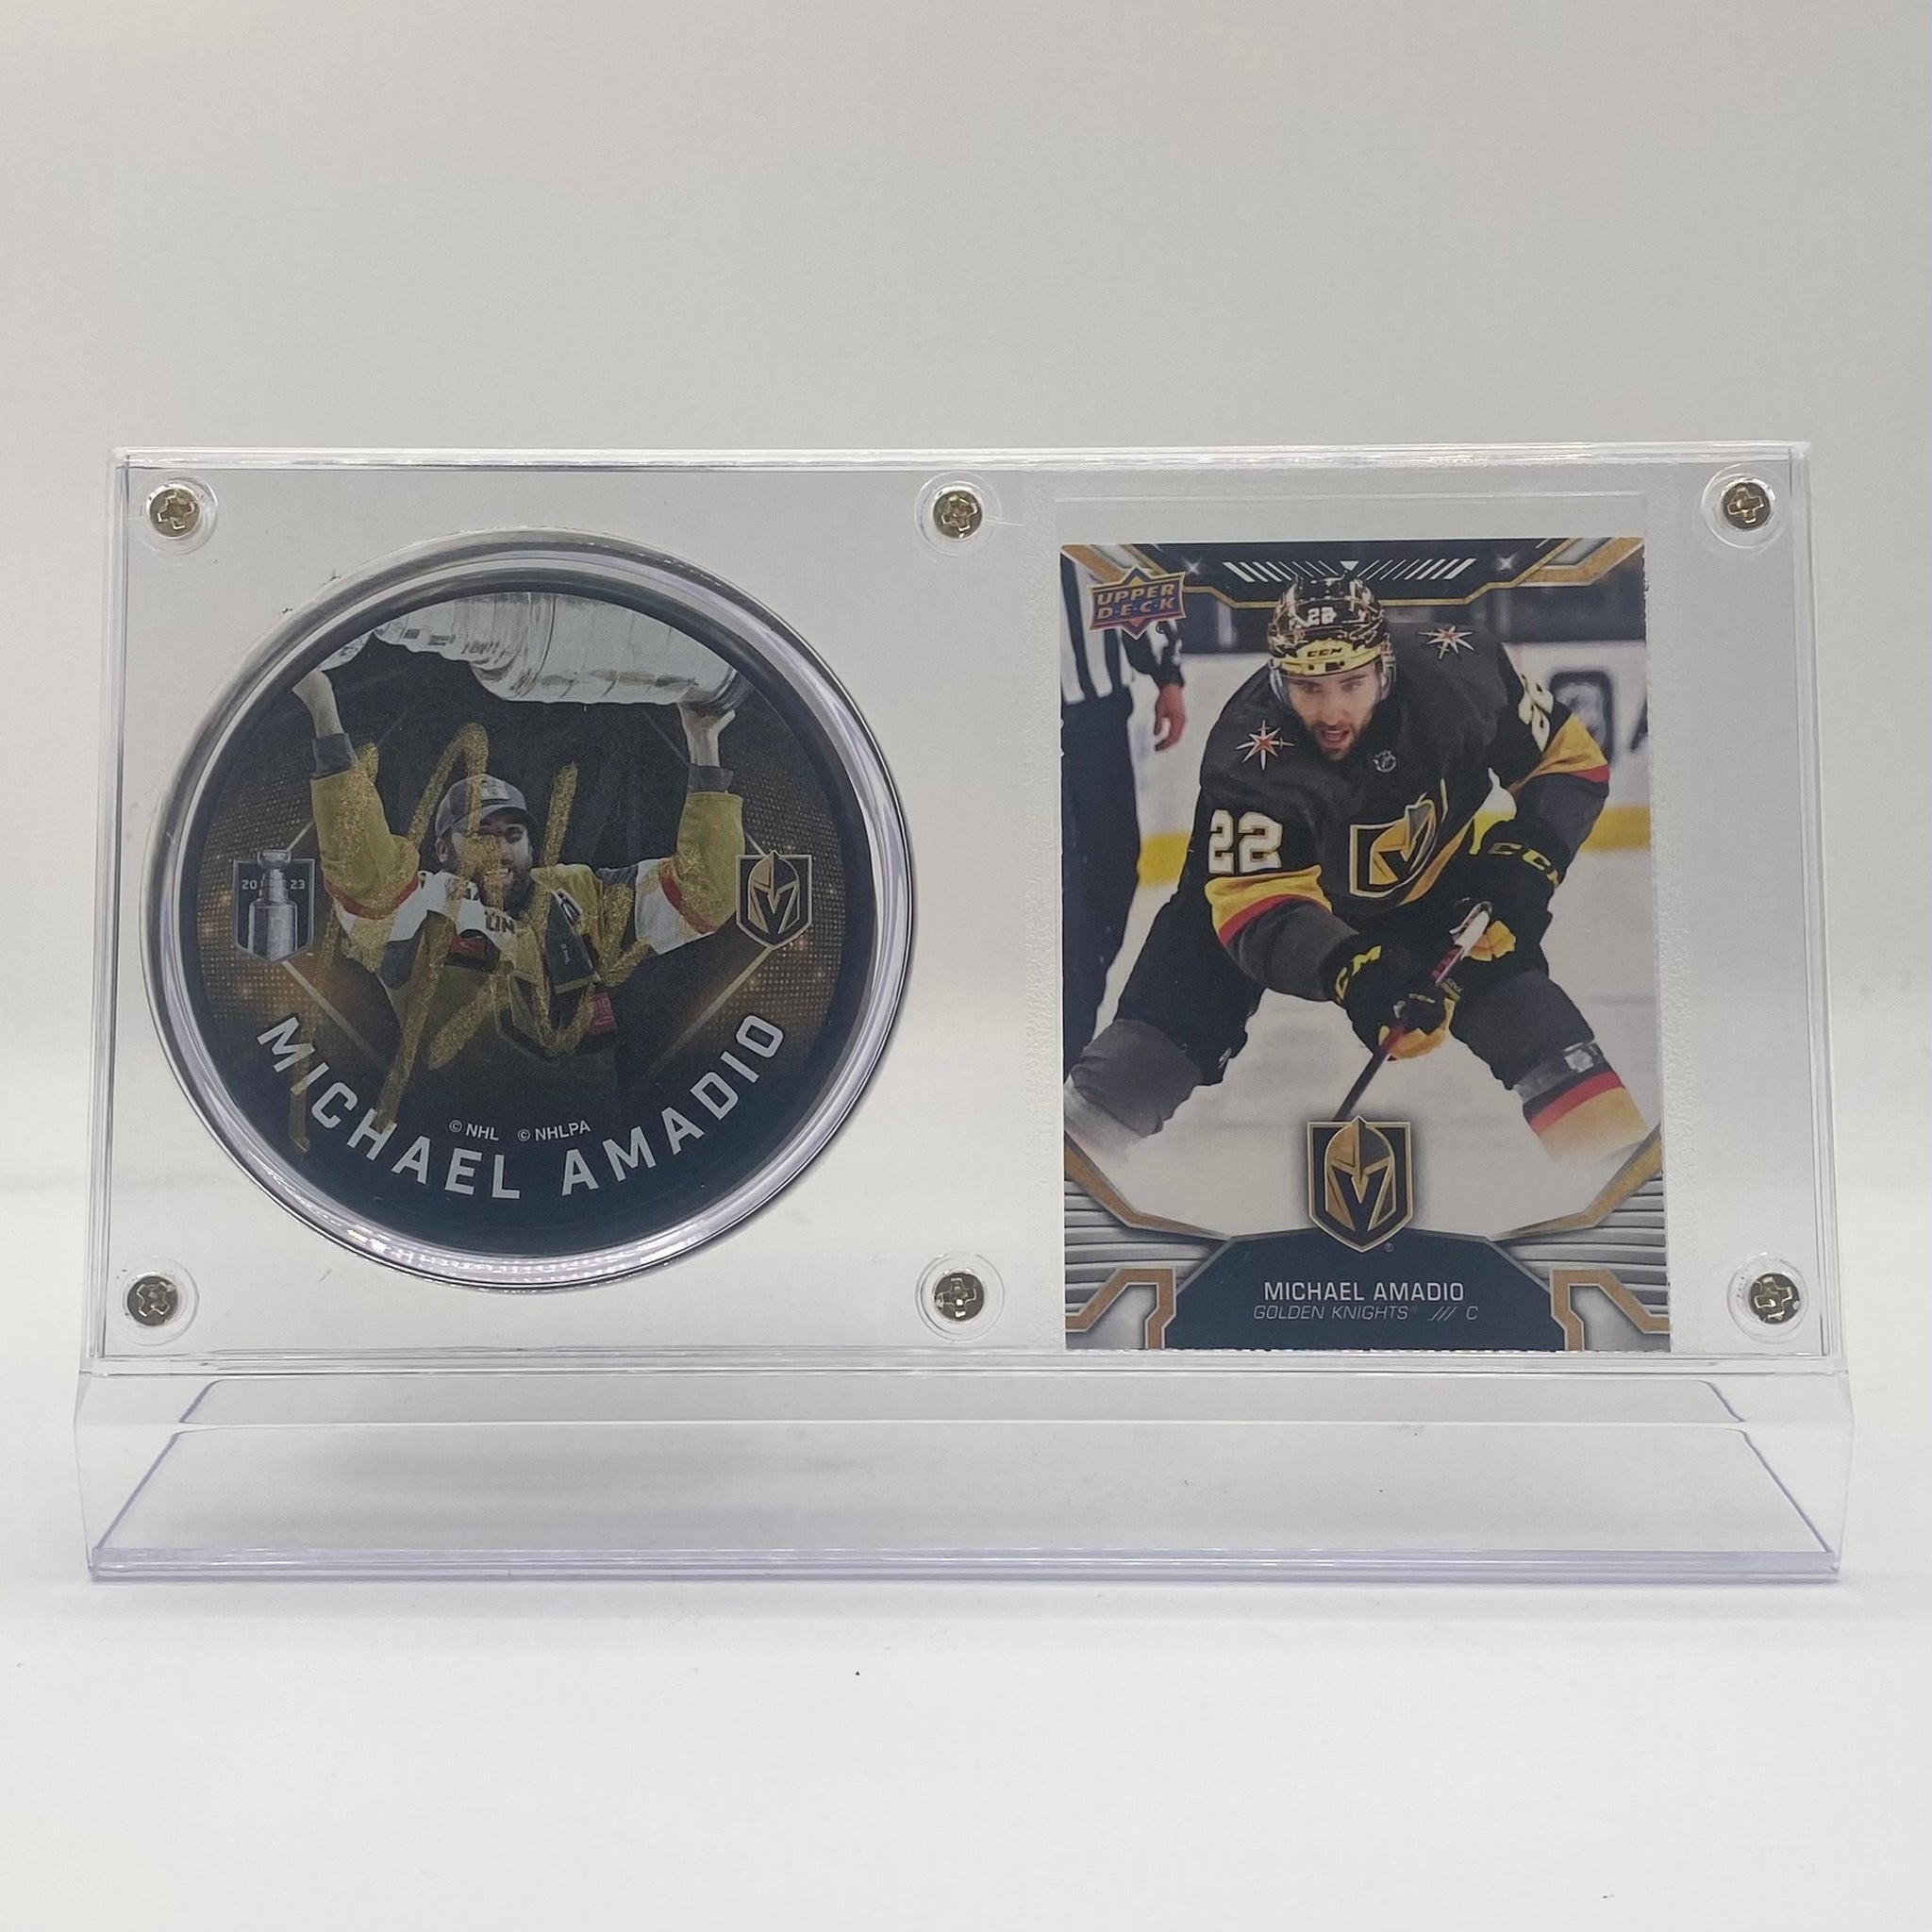 Michael Amadio Vegas Golden Knights Autographed Hockey Puck and Trading Card Case